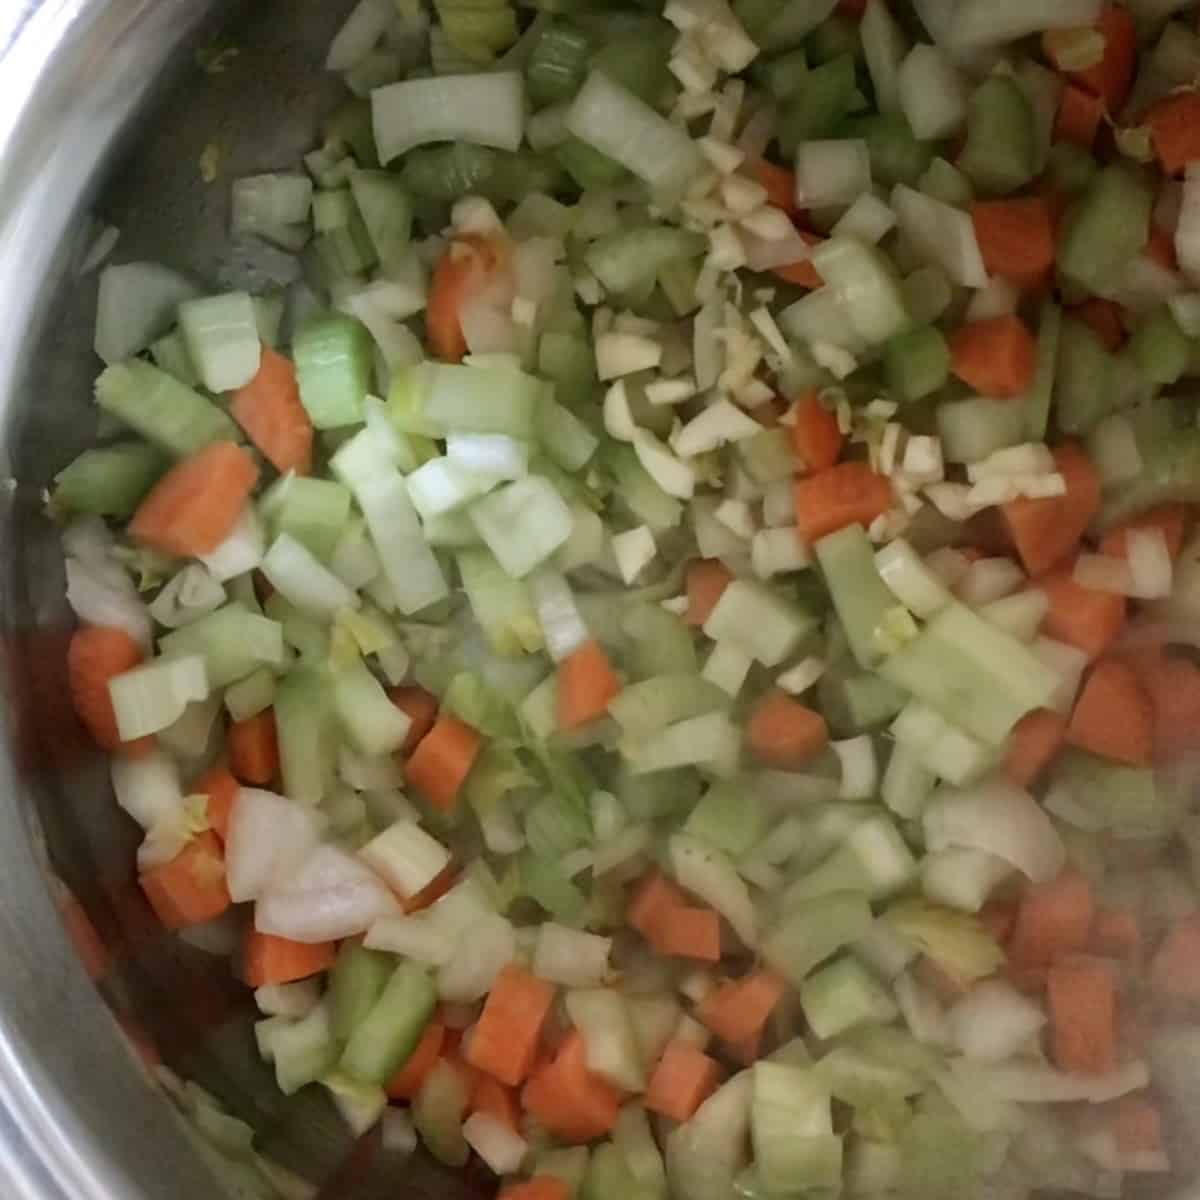 The cut up vegetables (carrots, celery, onion) for the bean soup are being sauteed in a large pot.